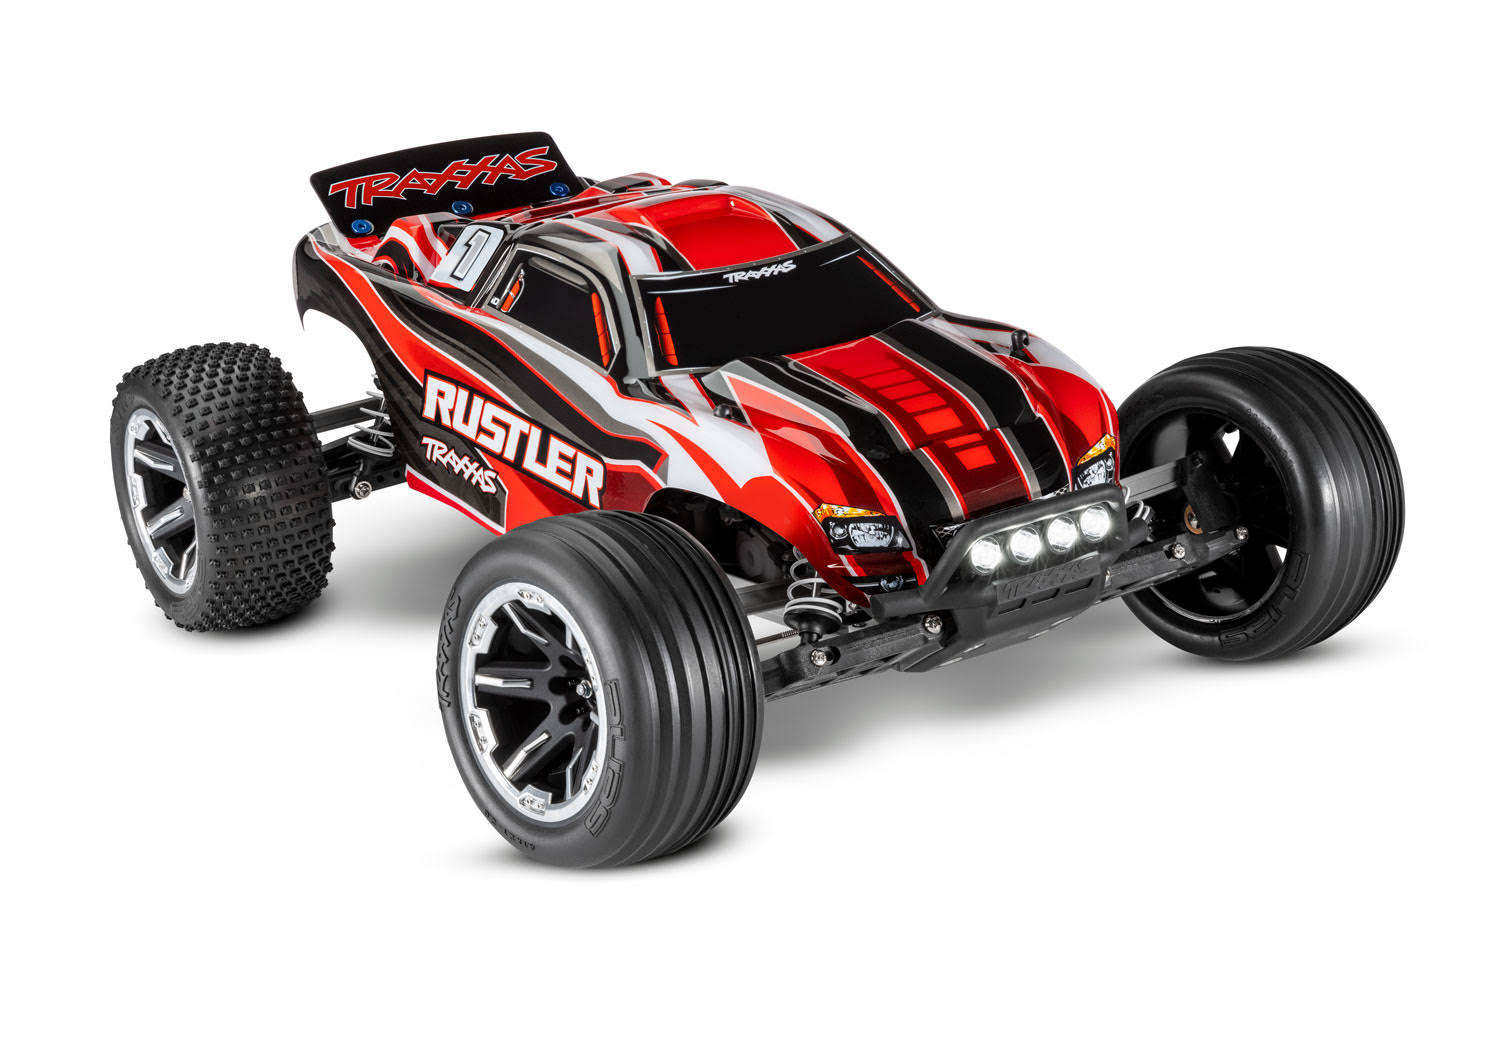 Traxxas 1/10 Rustler 2WD Stadium Truck, RTR With LED Lights